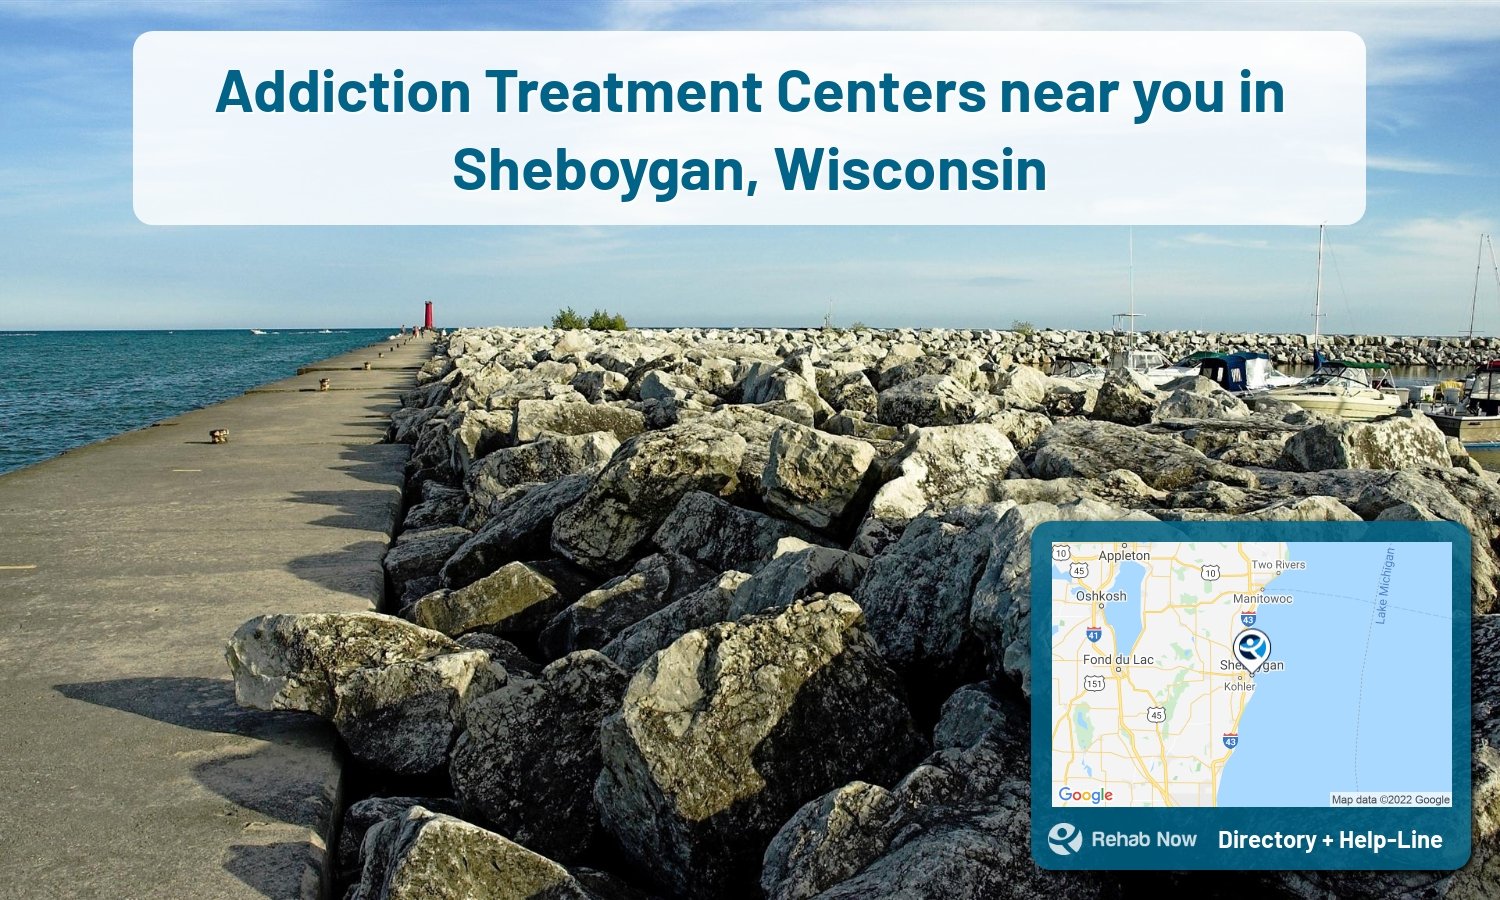 List of alcohol and drug treatment centers near you in Sheboygan, Wisconsin. Research certifications, programs, methods, pricing, and more.